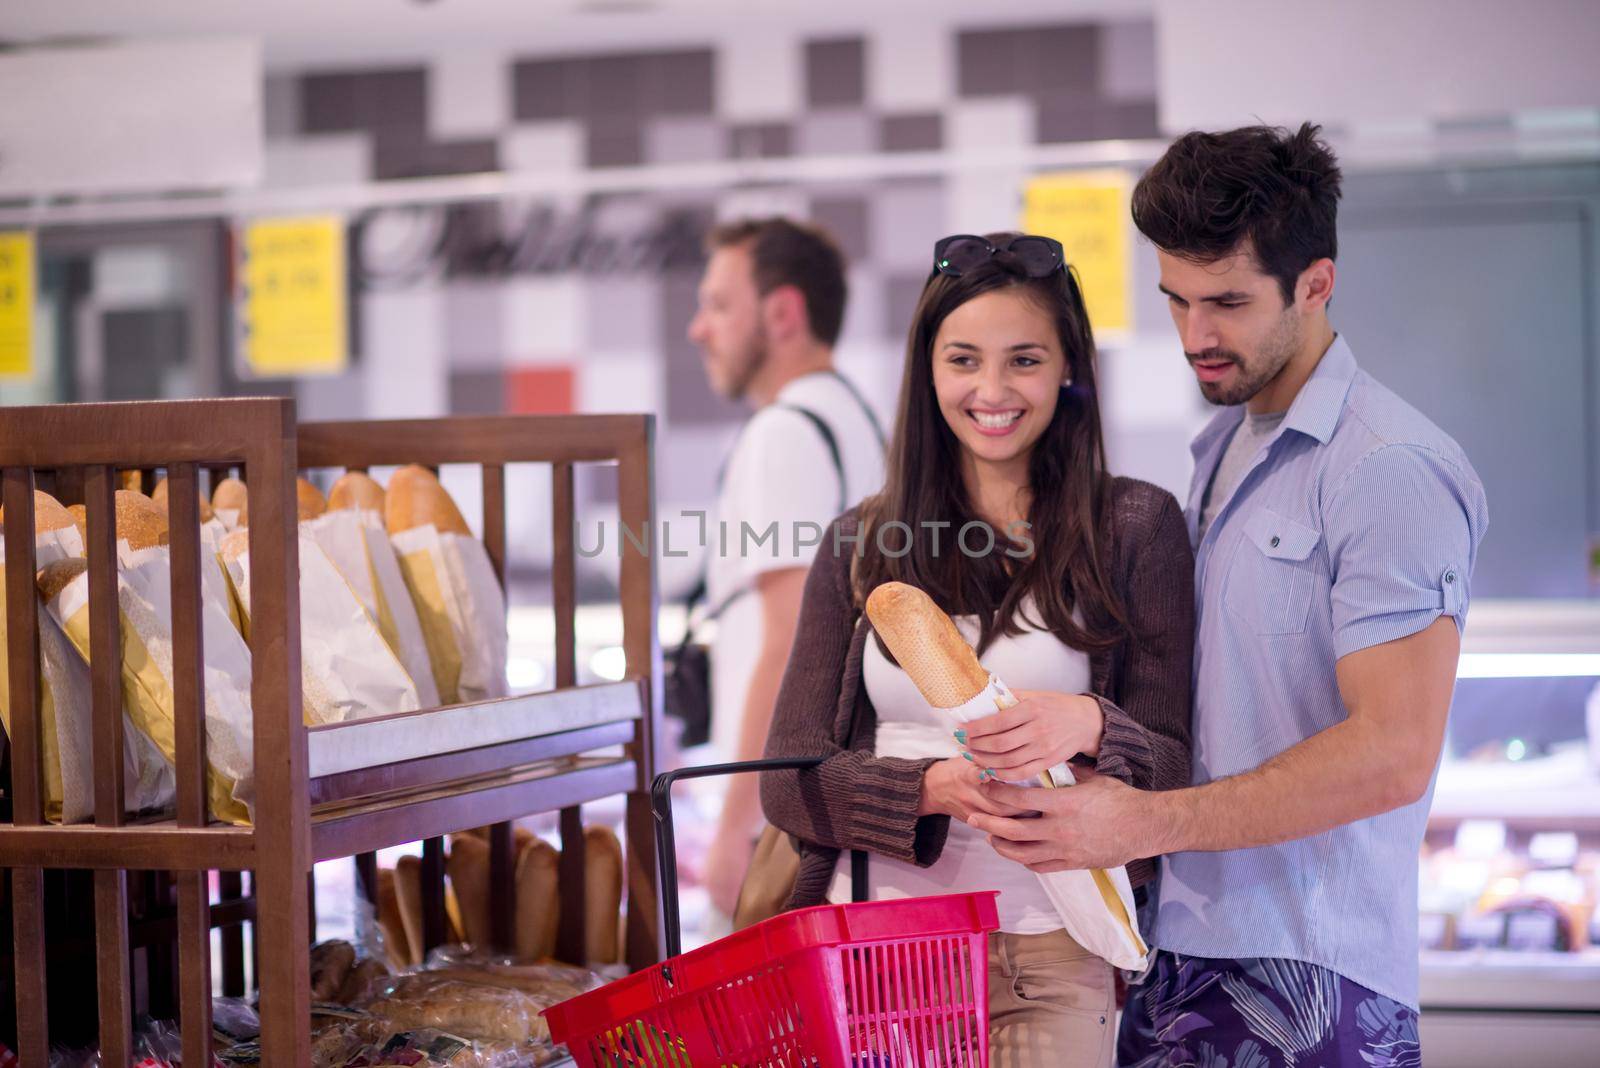 couple shopping in a supermarket by dotshock